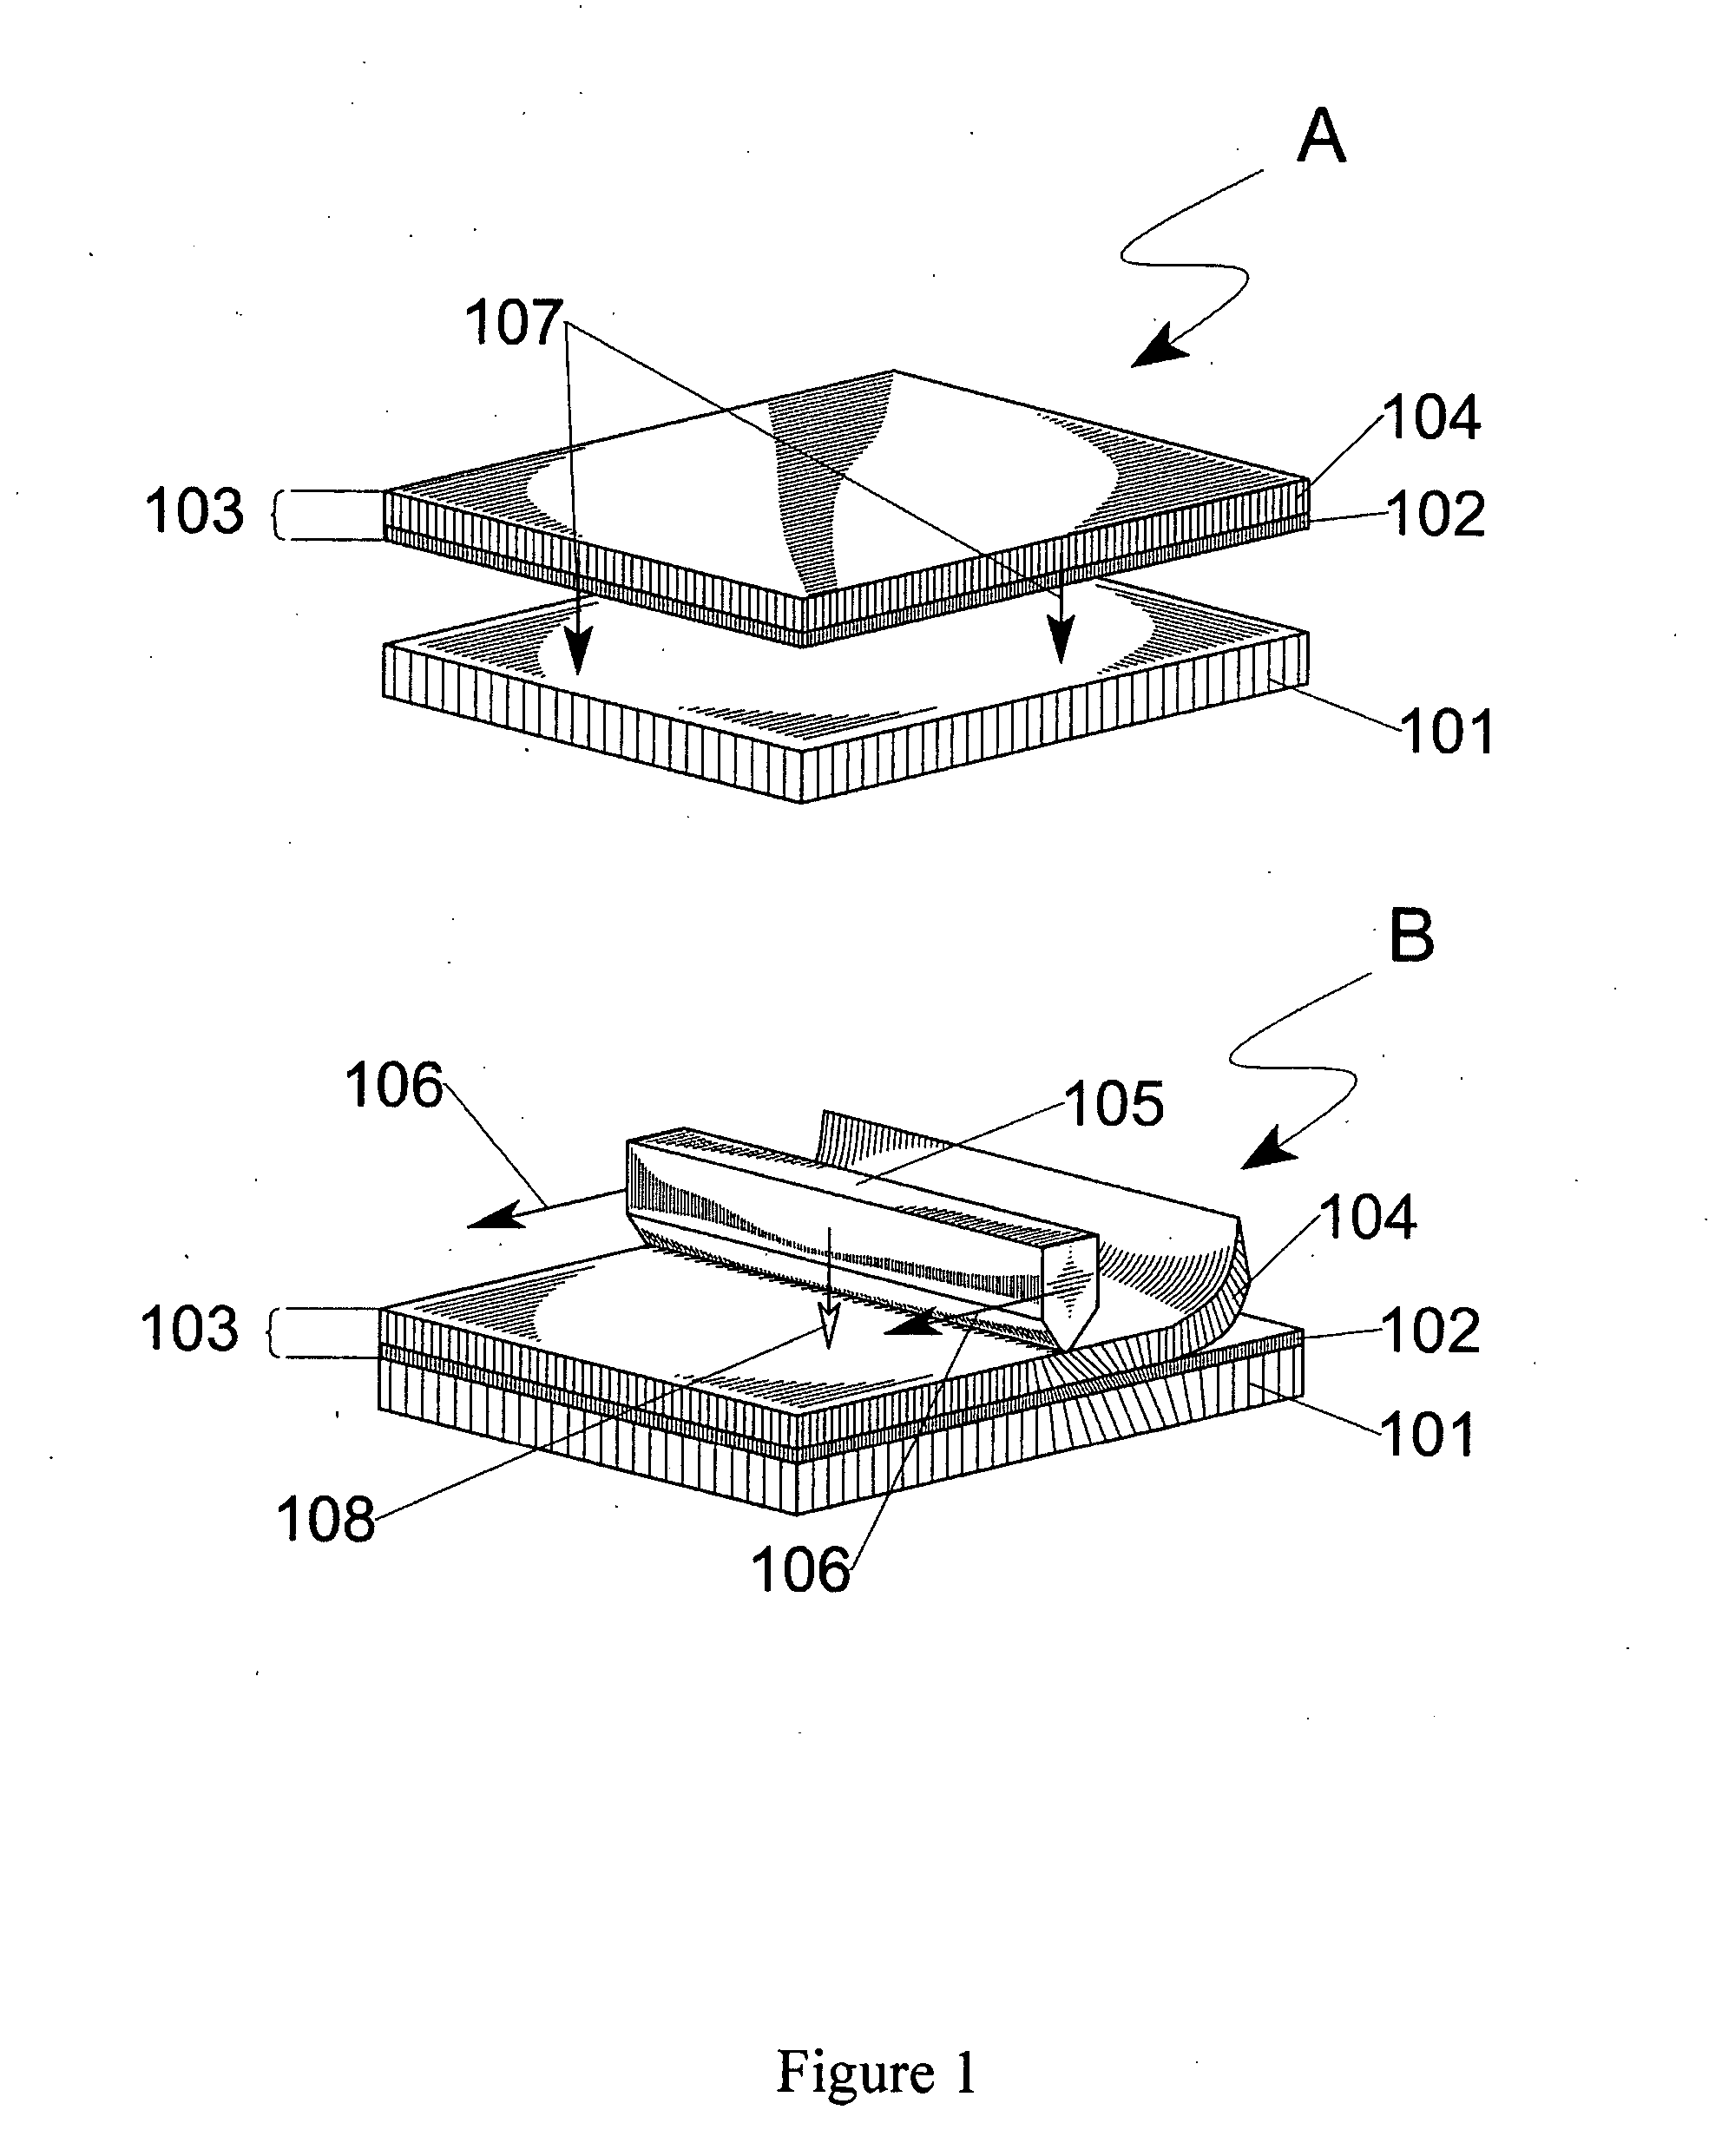 Method and device for transferring anisotropic crystal film from donor to receptor, and the donor